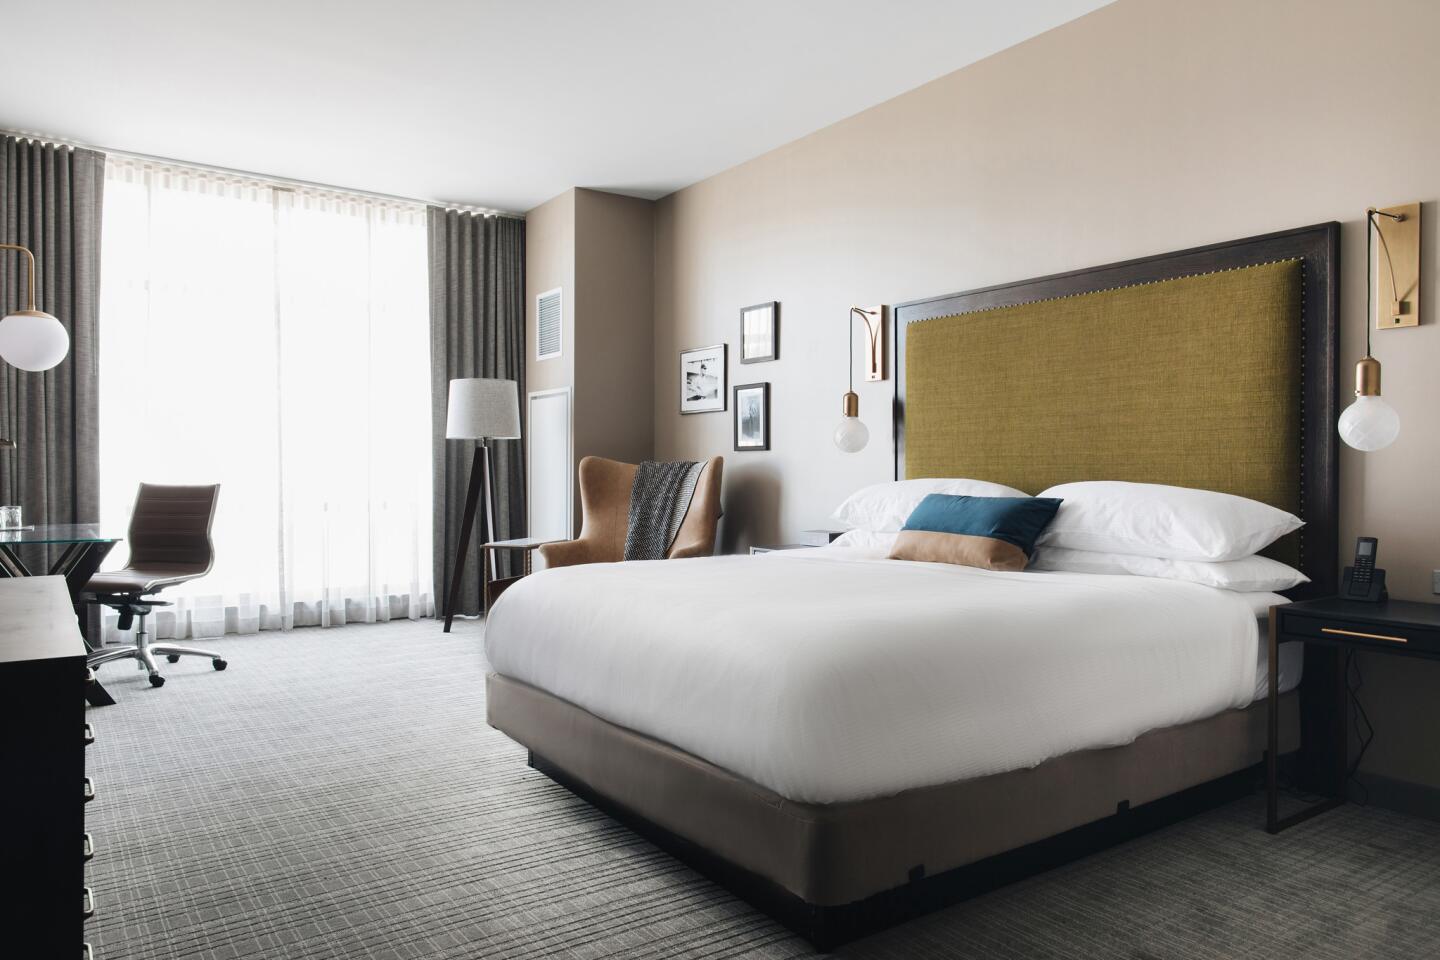 A Hotel Zachary mock guest room evokes neighborhood comfort and Chicago history, along with a few subtle nods to Wrigley Field, said Lisa Chervinsky, Stantec’s lead designer for the 173 guest rooms.